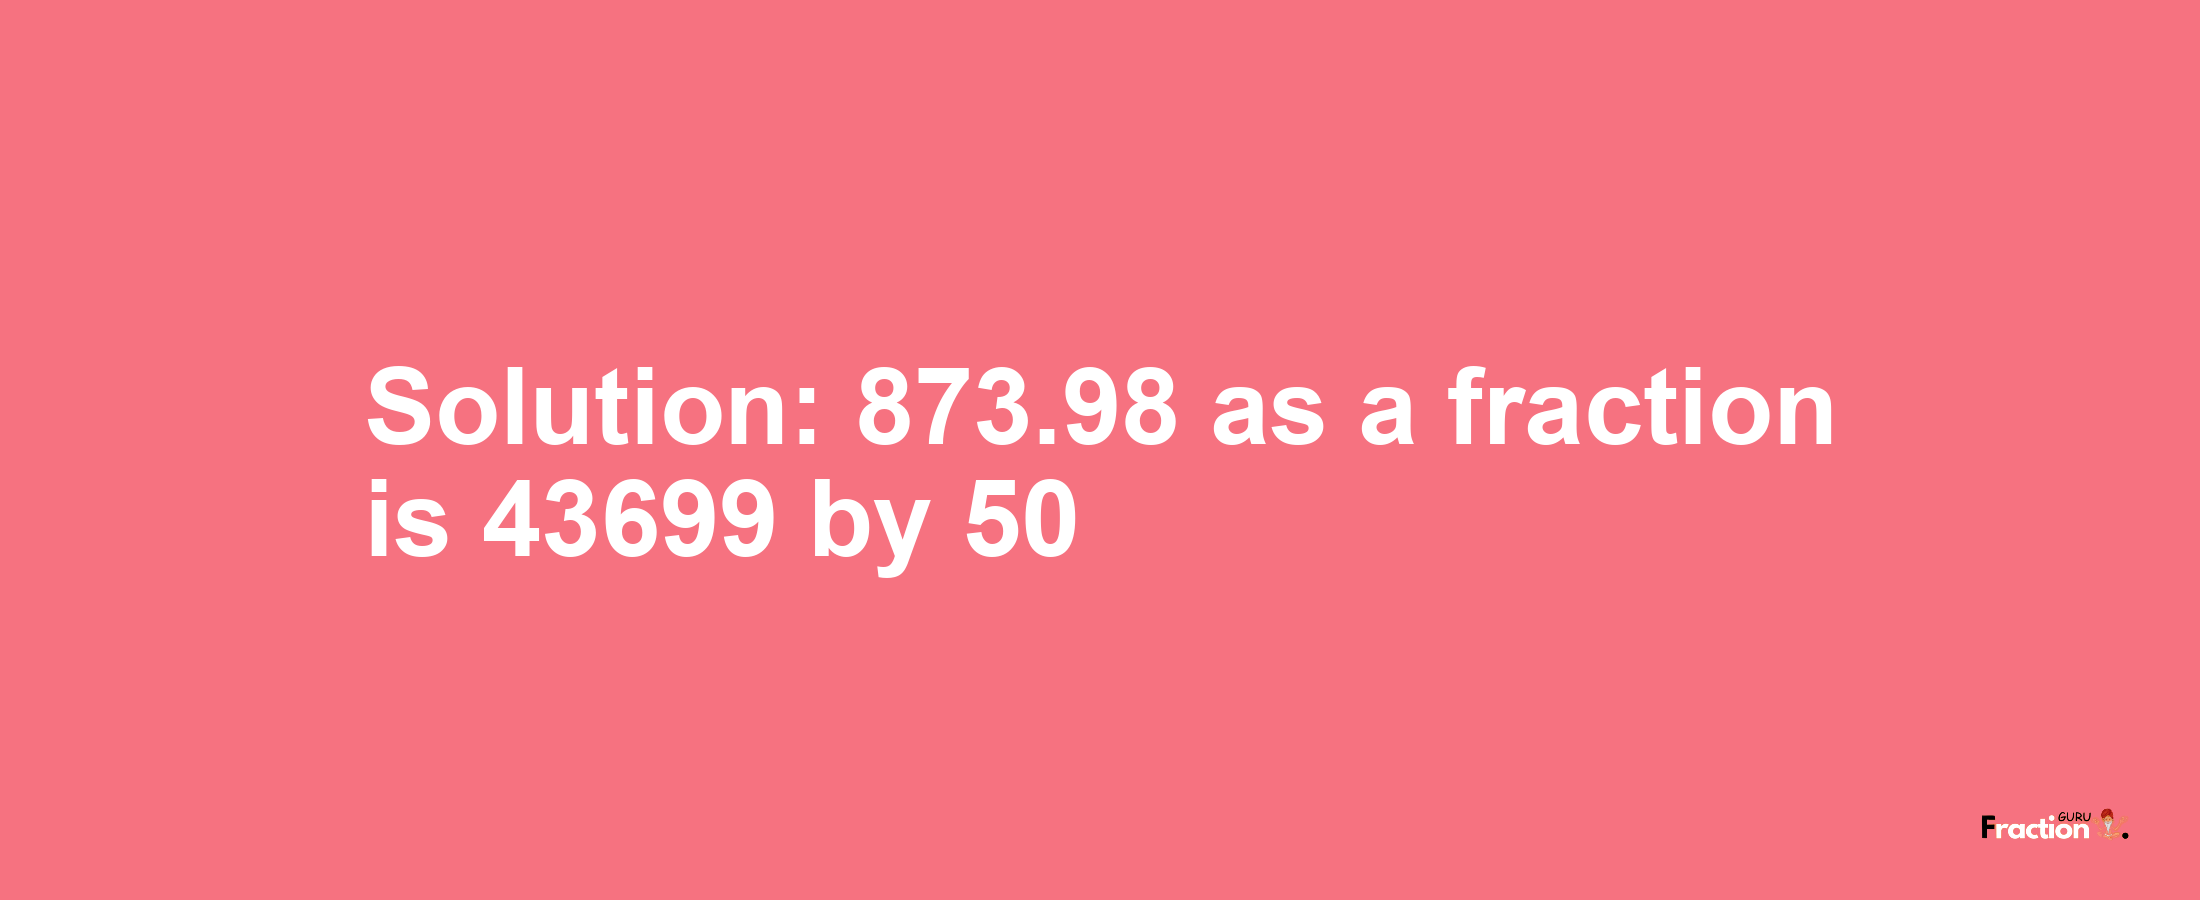 Solution:873.98 as a fraction is 43699/50